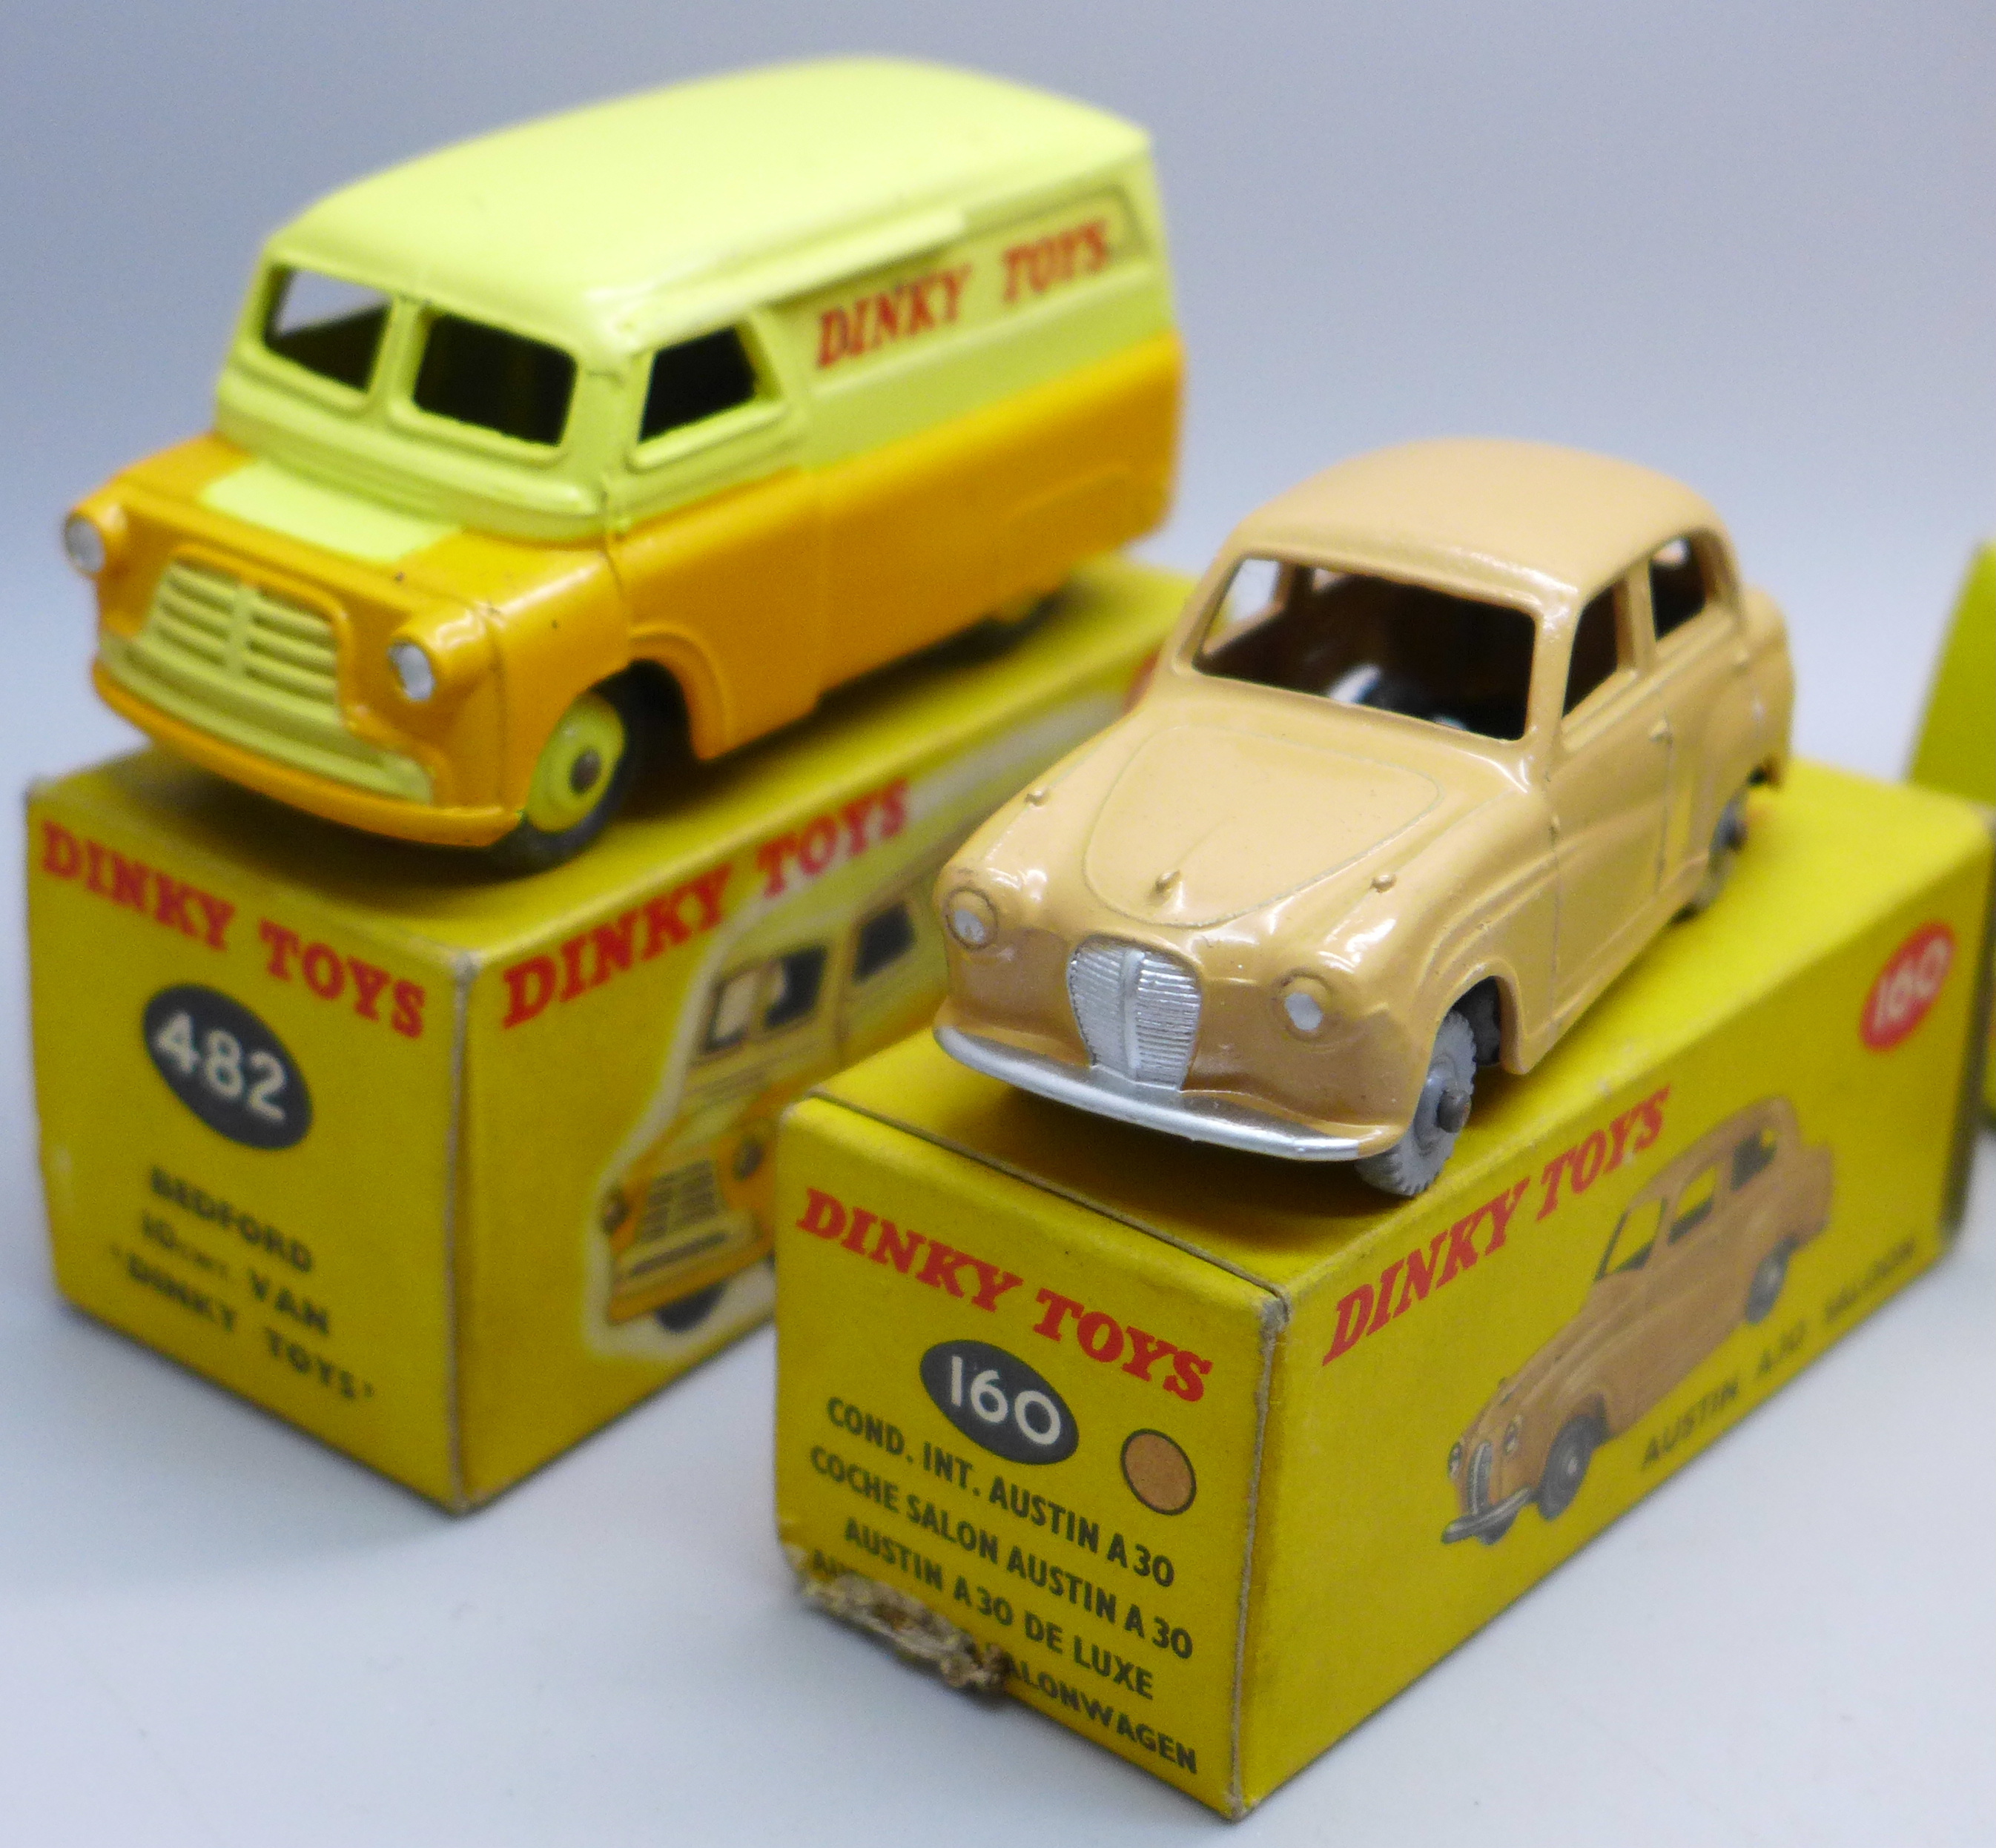 Five Dinky Toys vehicles, 160 Austin A30 Saloon, 255 Mersey Tunnel Police Van, 405 Universal Jeep, - Image 2 of 6